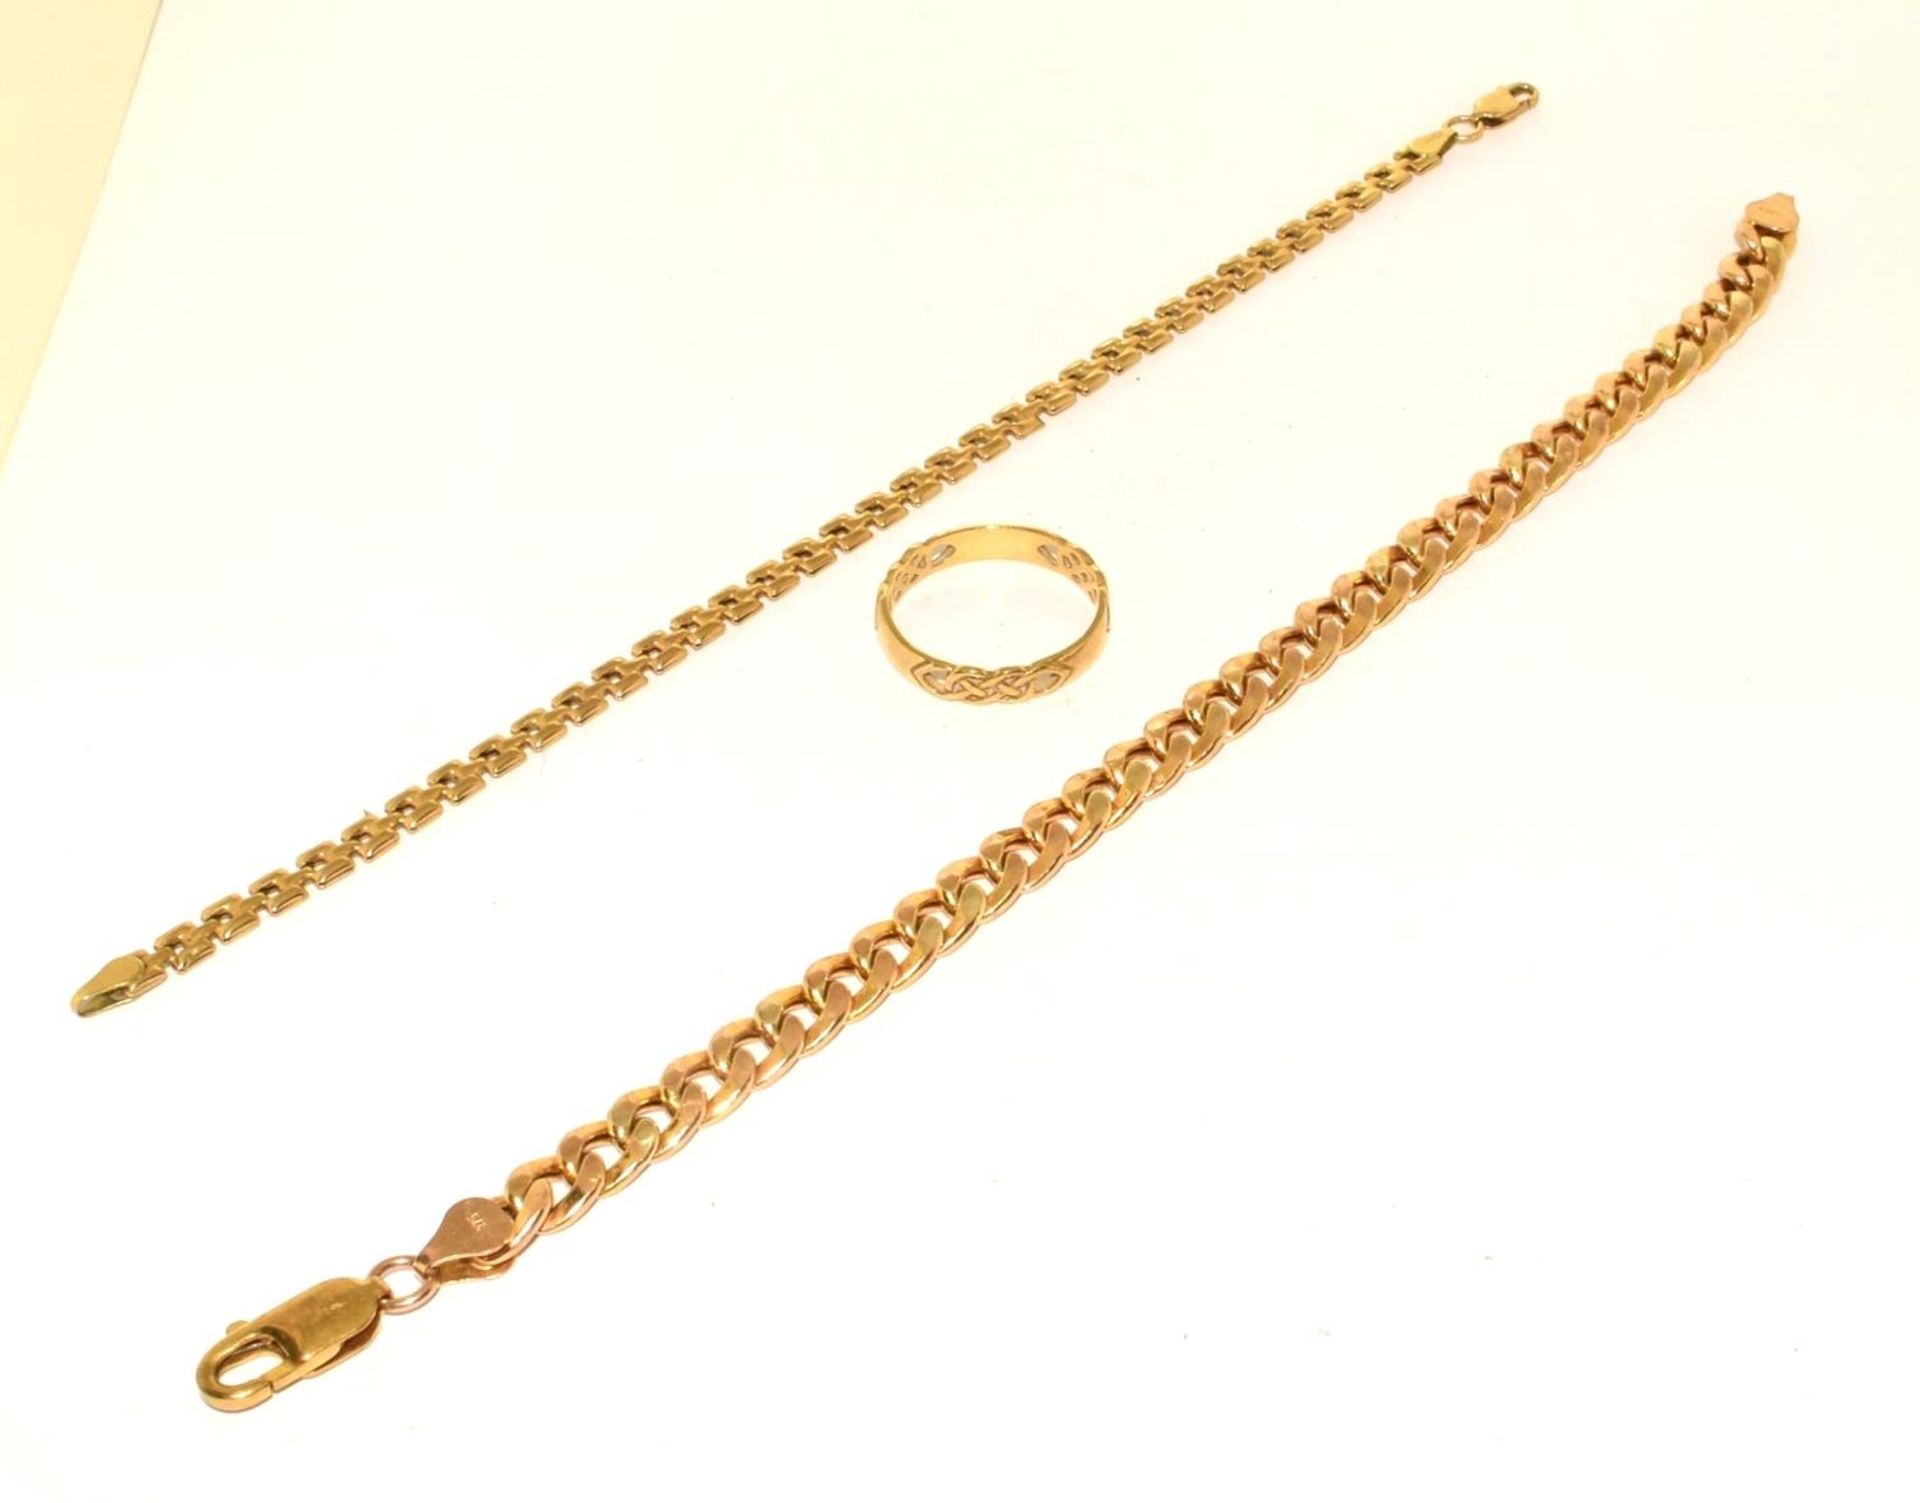 9ct gold jewellery to include 2 x bracelets and a wedding band 15g ref 71 56 66